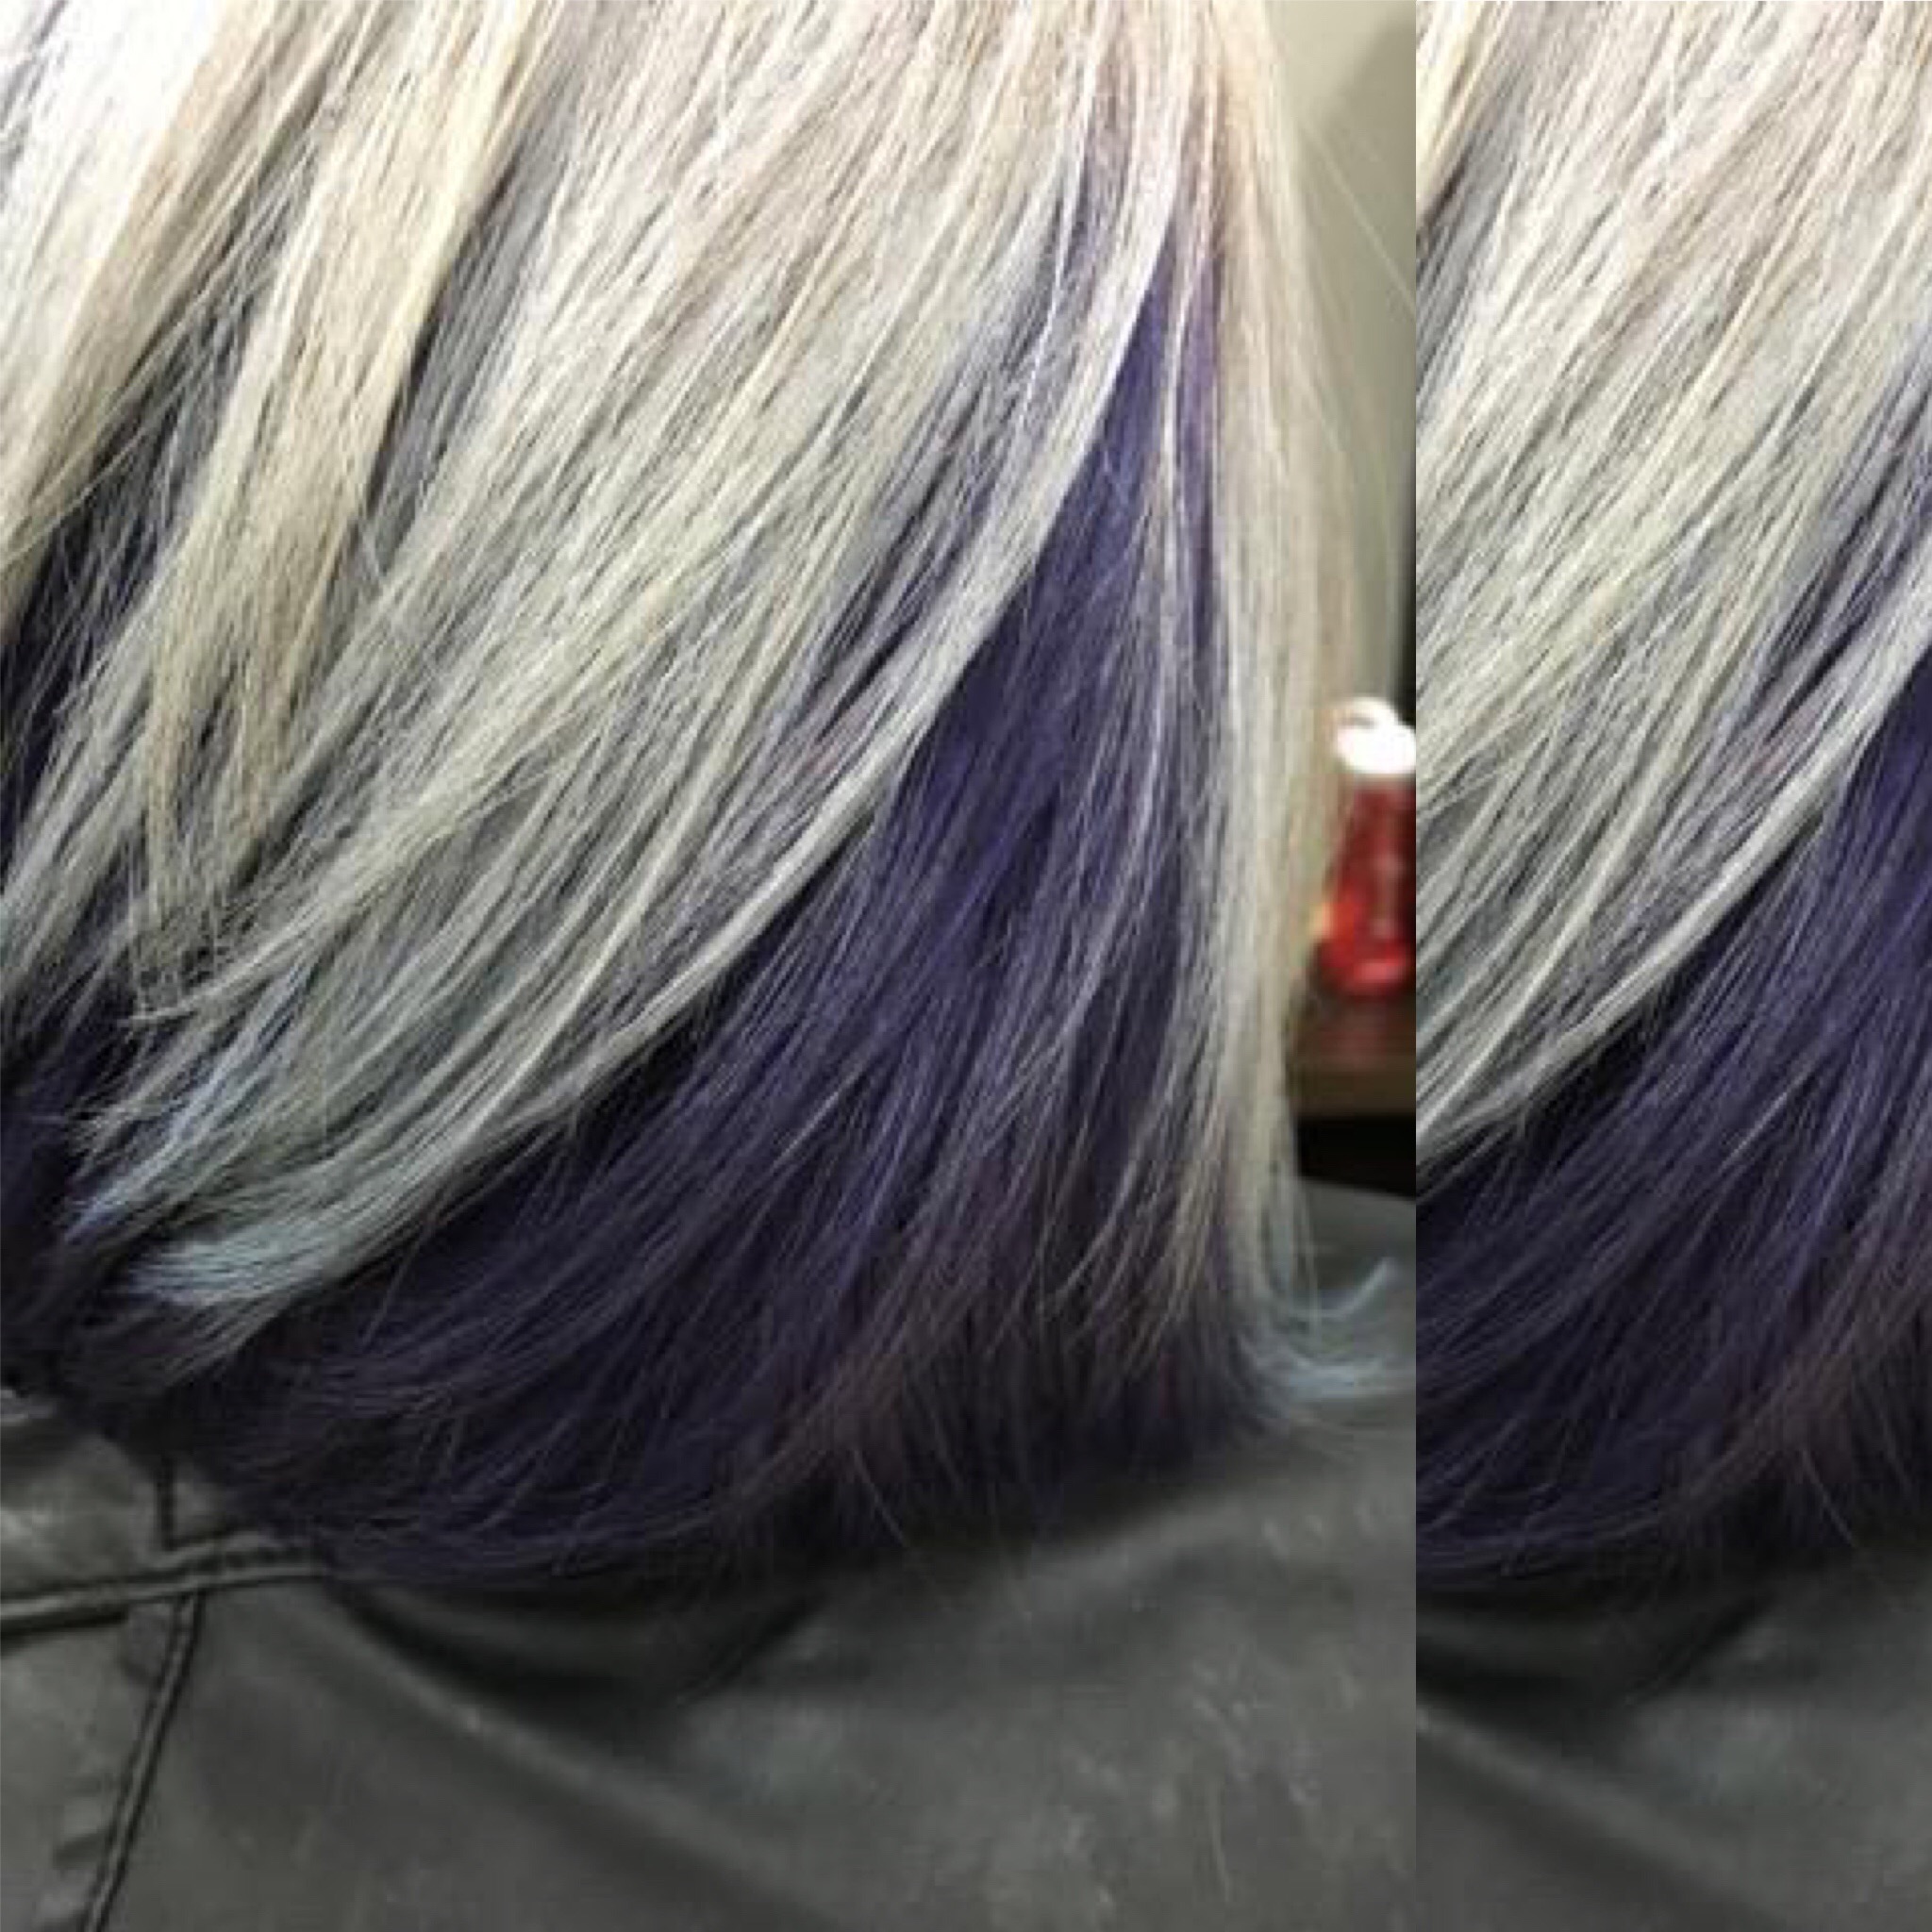 A platinum blond long bob with a hidden purple under layer done by Megan